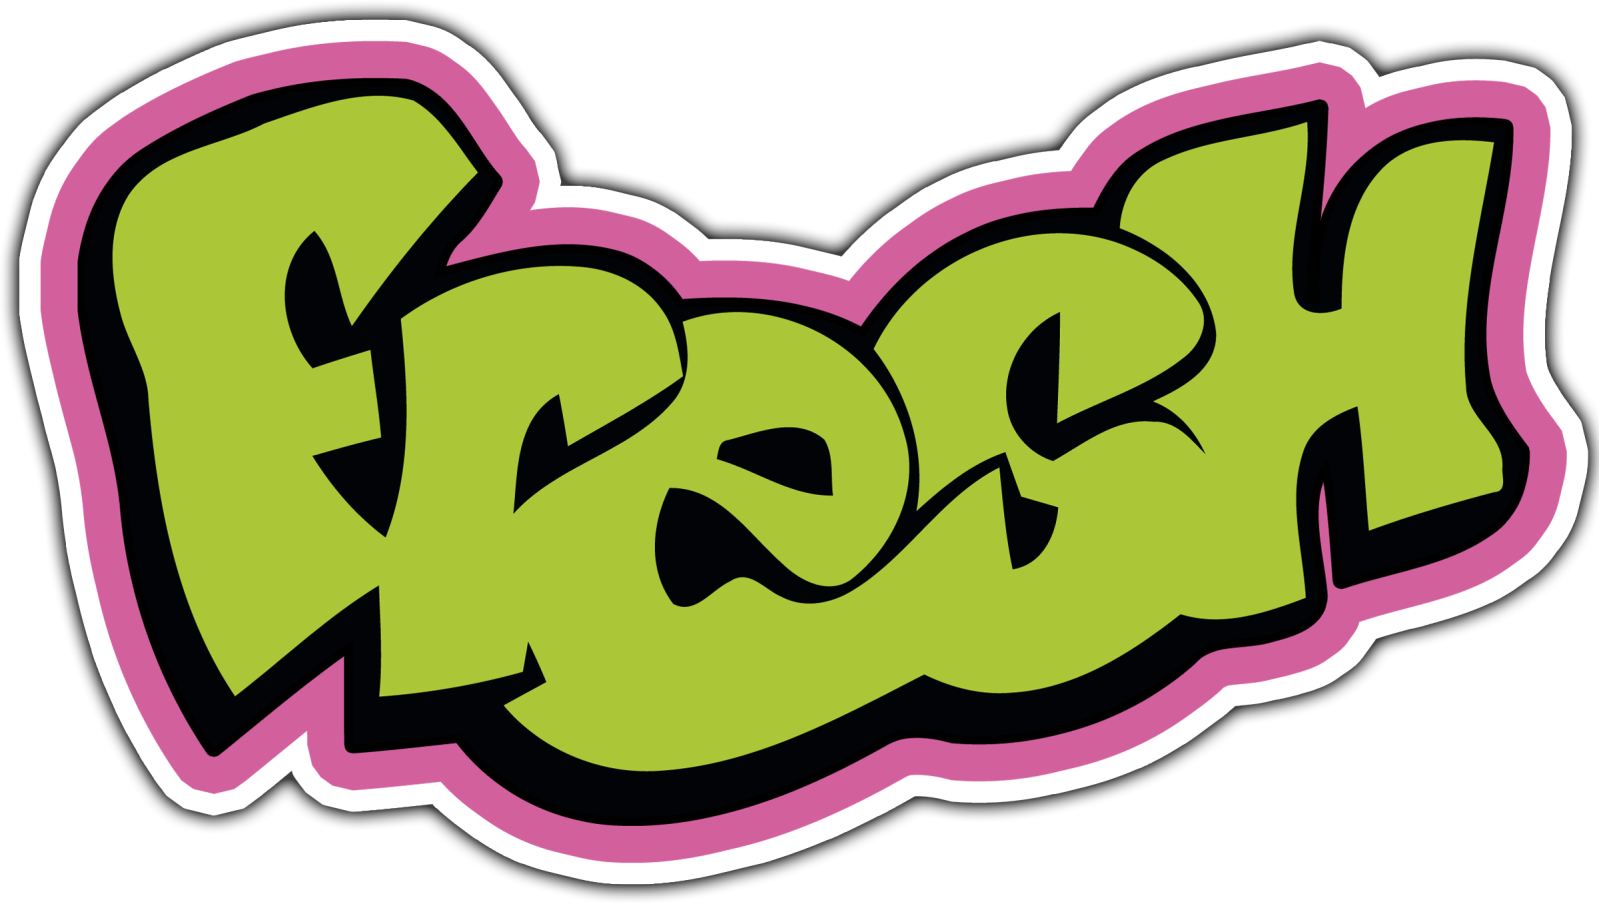 Fresh Prince Of Bel Air Logo Font, Find more high quality free transparent ...